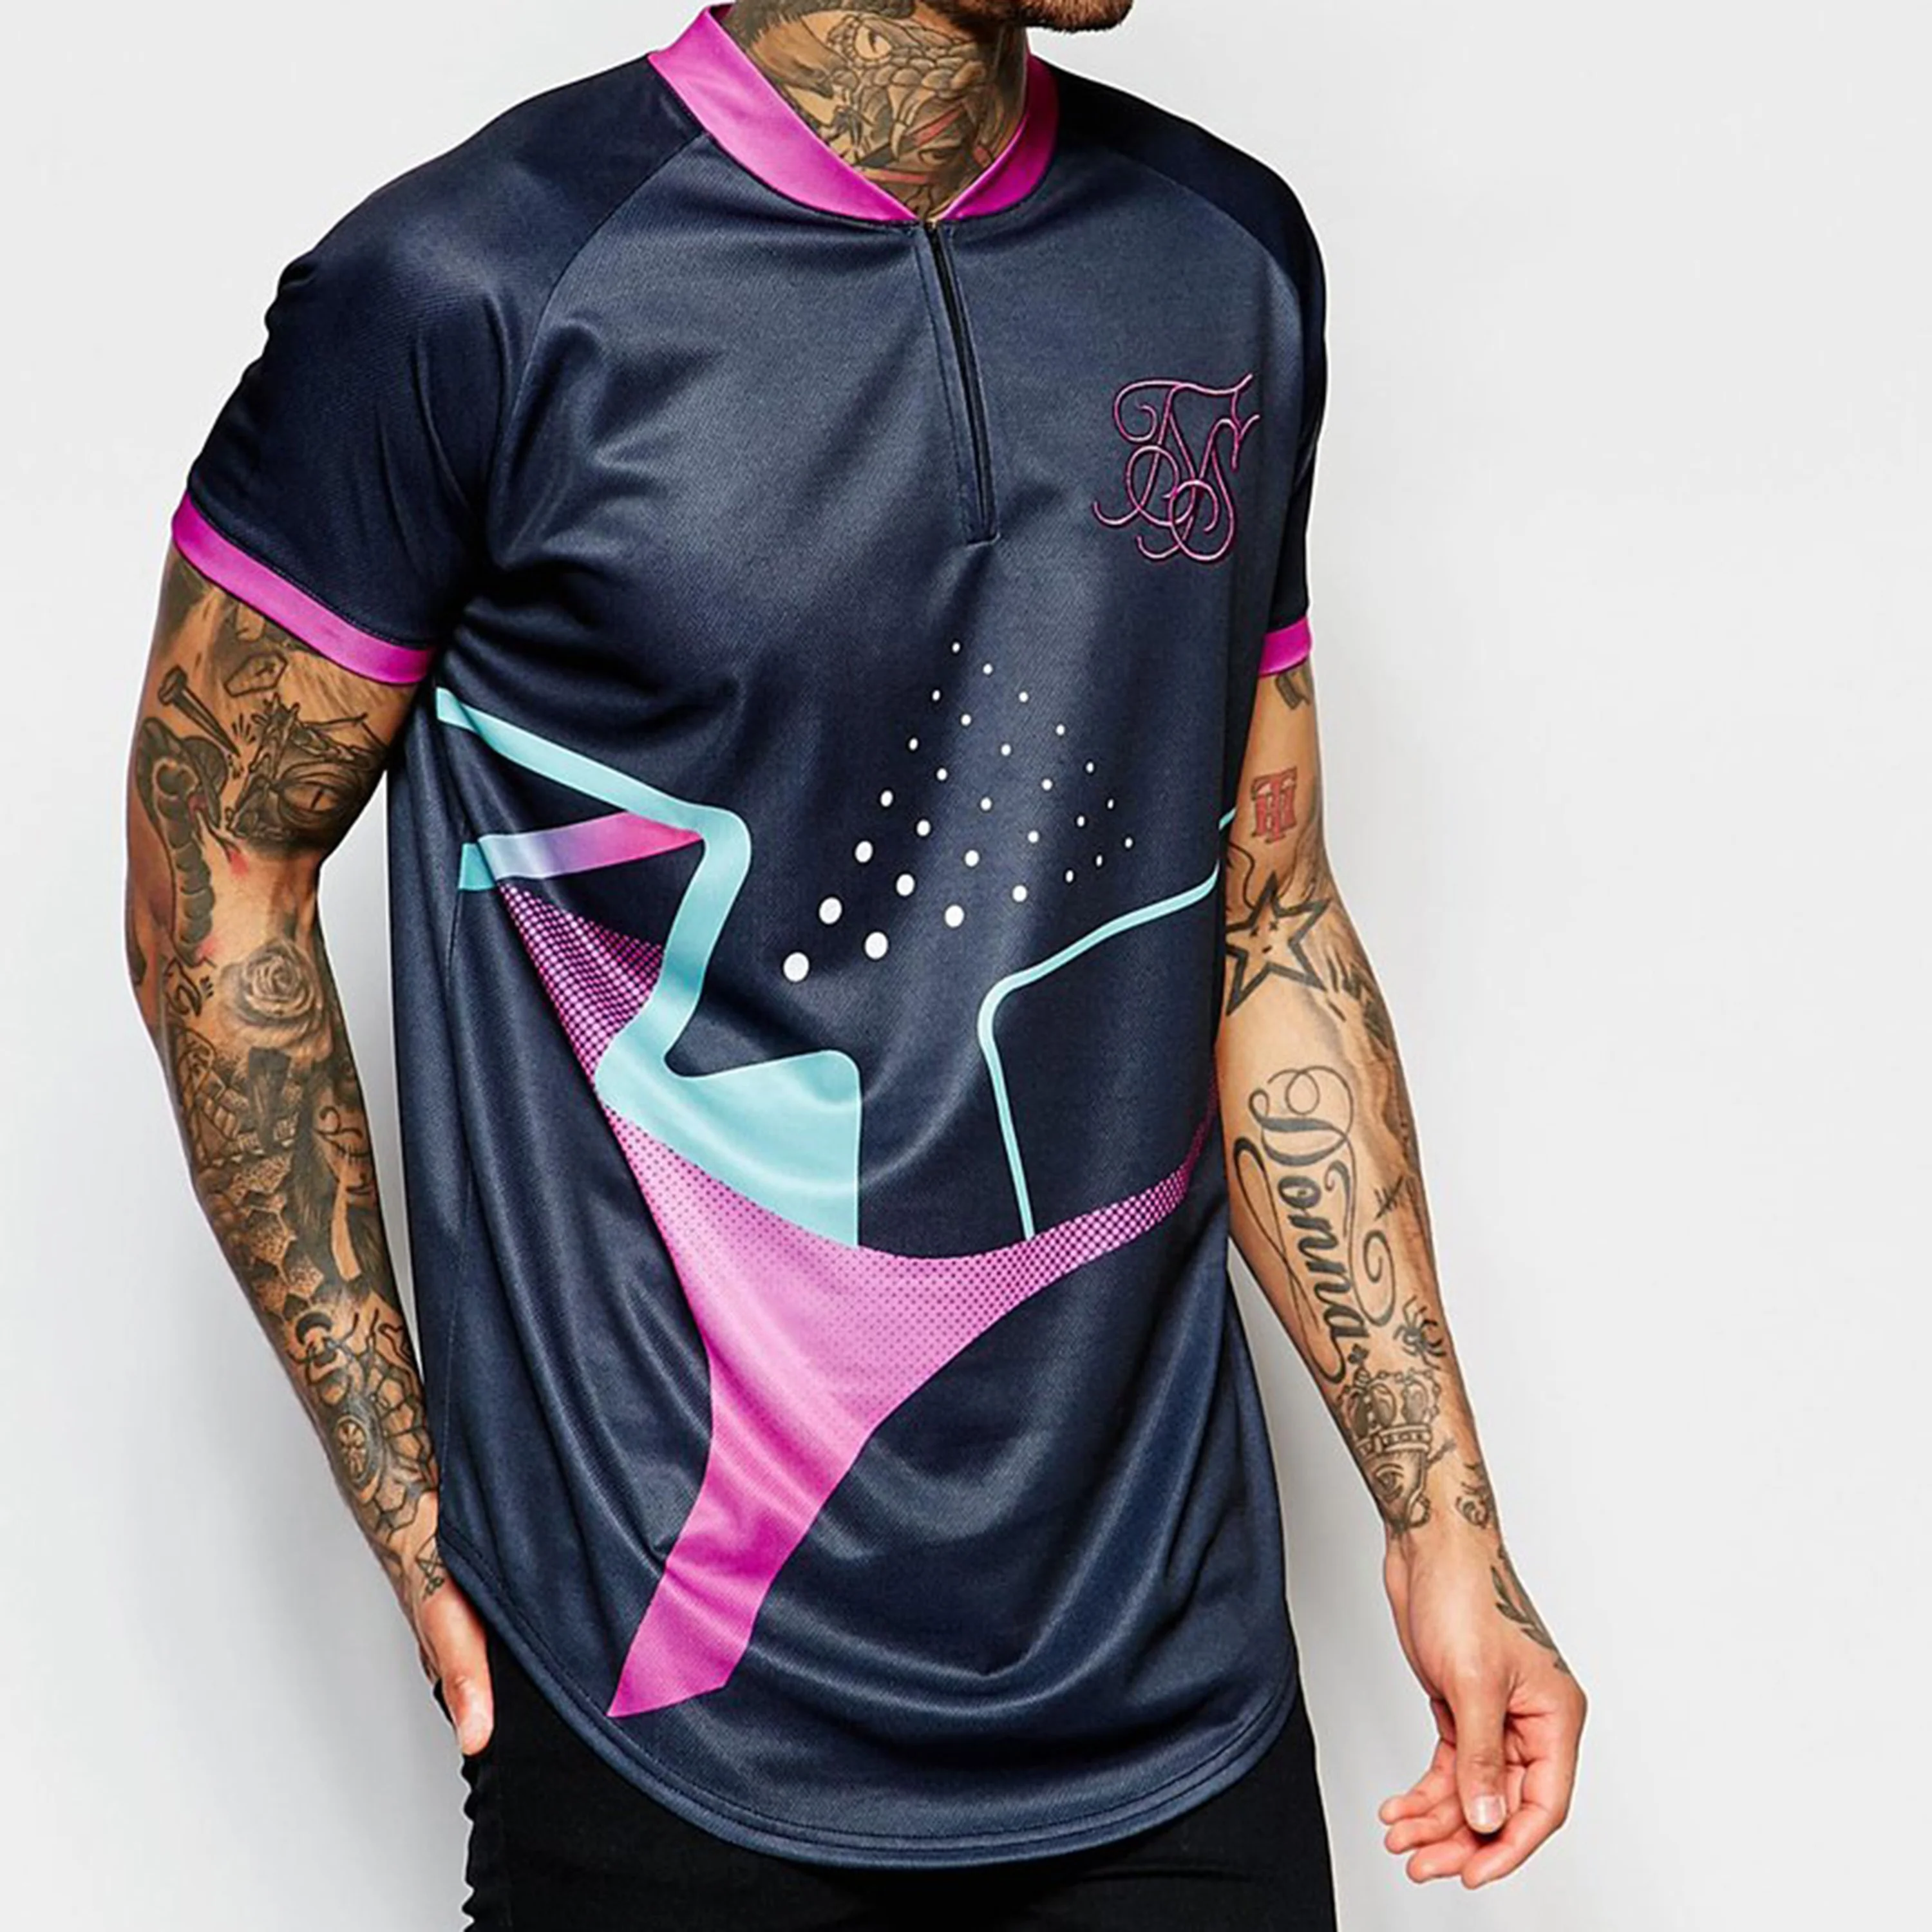 Source Extra comfortable long lasting custom sublimation cycling Jerseys for unisex online wholesales Bangladesh mens clothing on m.alibaba